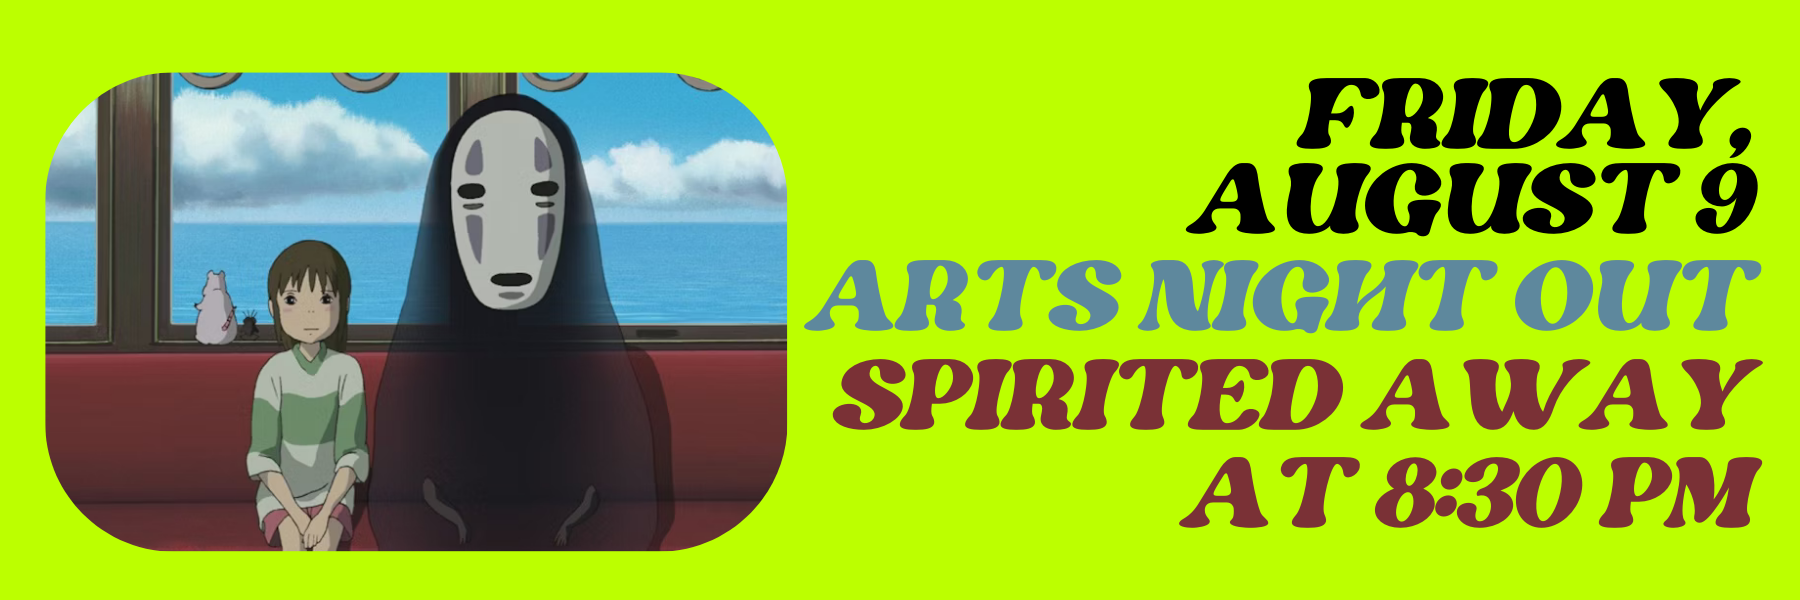 Friday, August 9
Arts Night Out
Spirited Away
at 8:30 PM